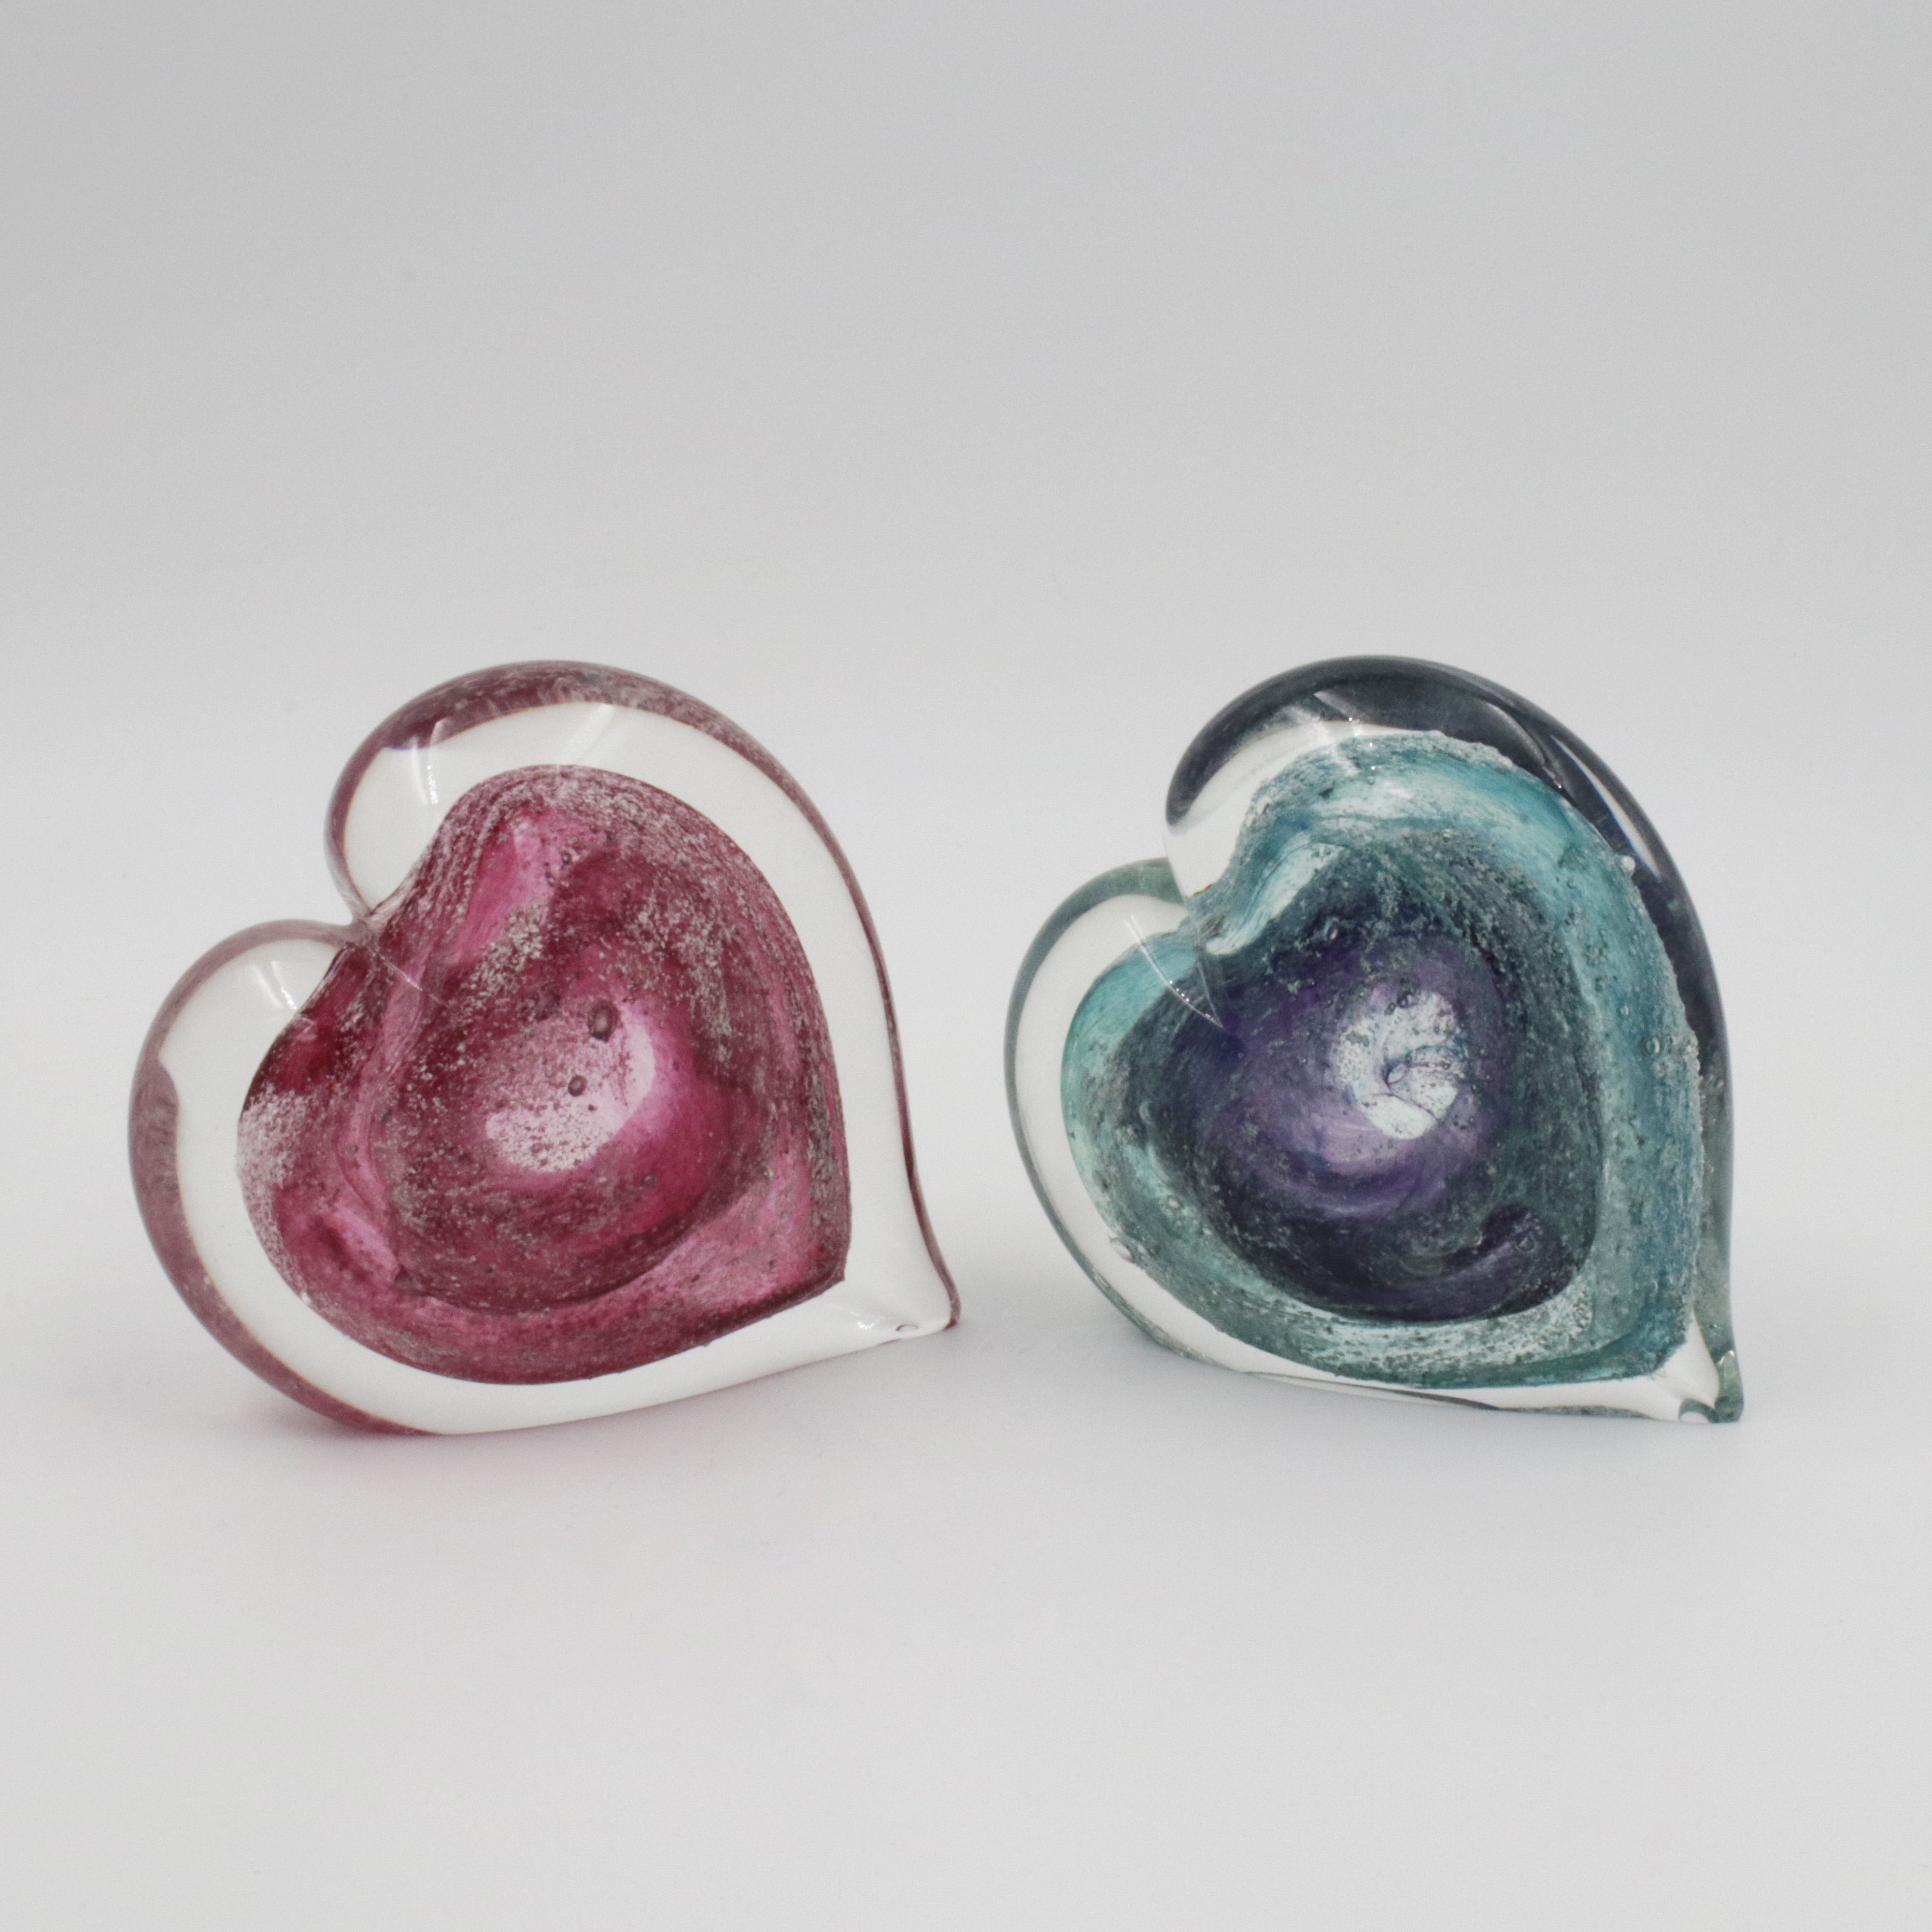 The standing Memorial heart paperweights.
The hearts can be made in a variety of colours.
Prices from £100